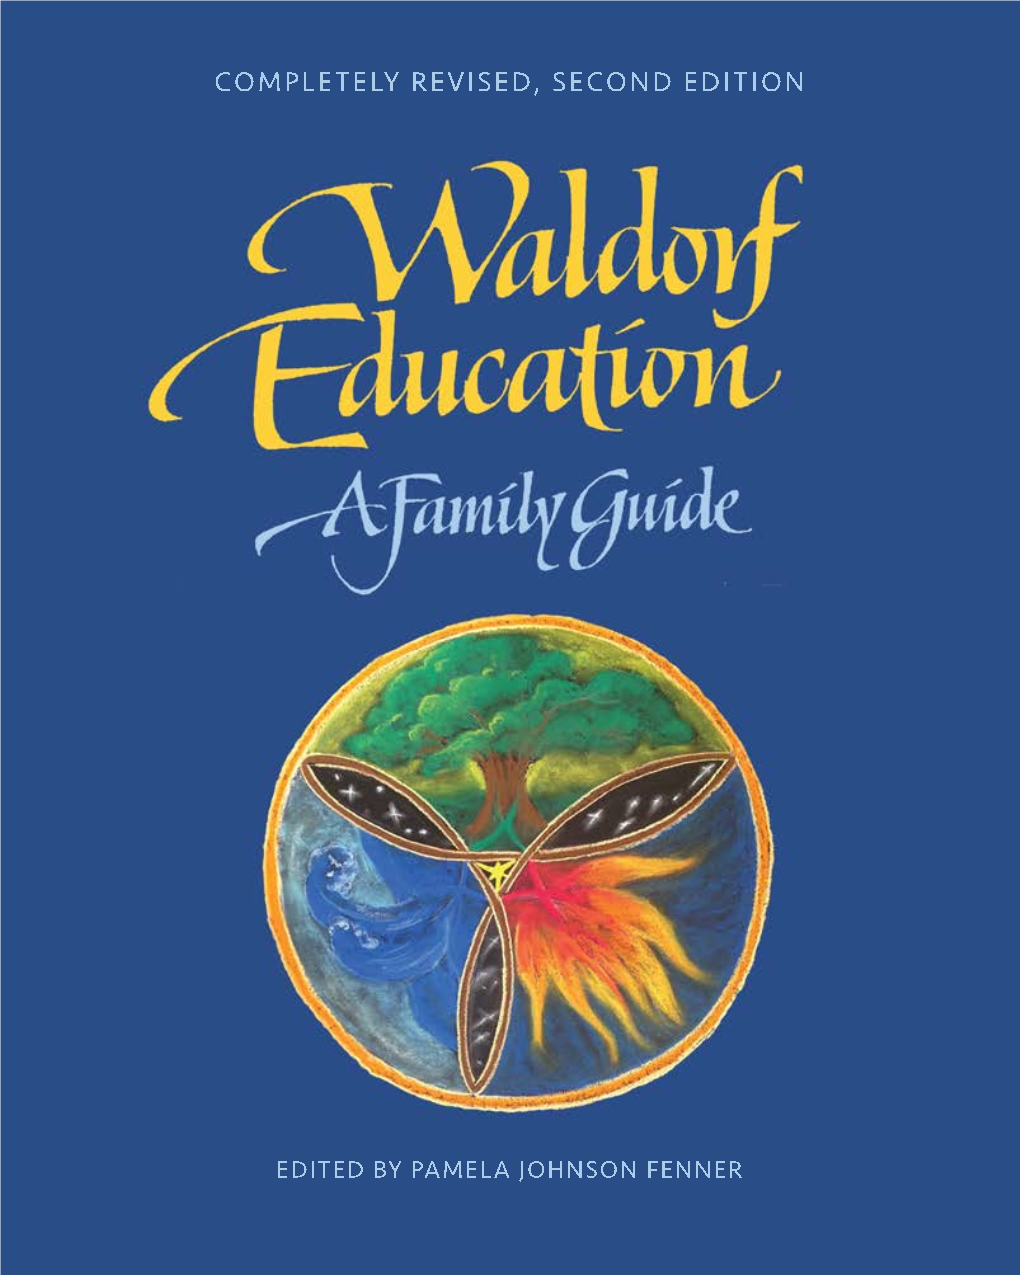 A Family Guide, 2Nd Edition Compilation Copyright © 2020 Pamela Johnson Fenner All Rights Reserved